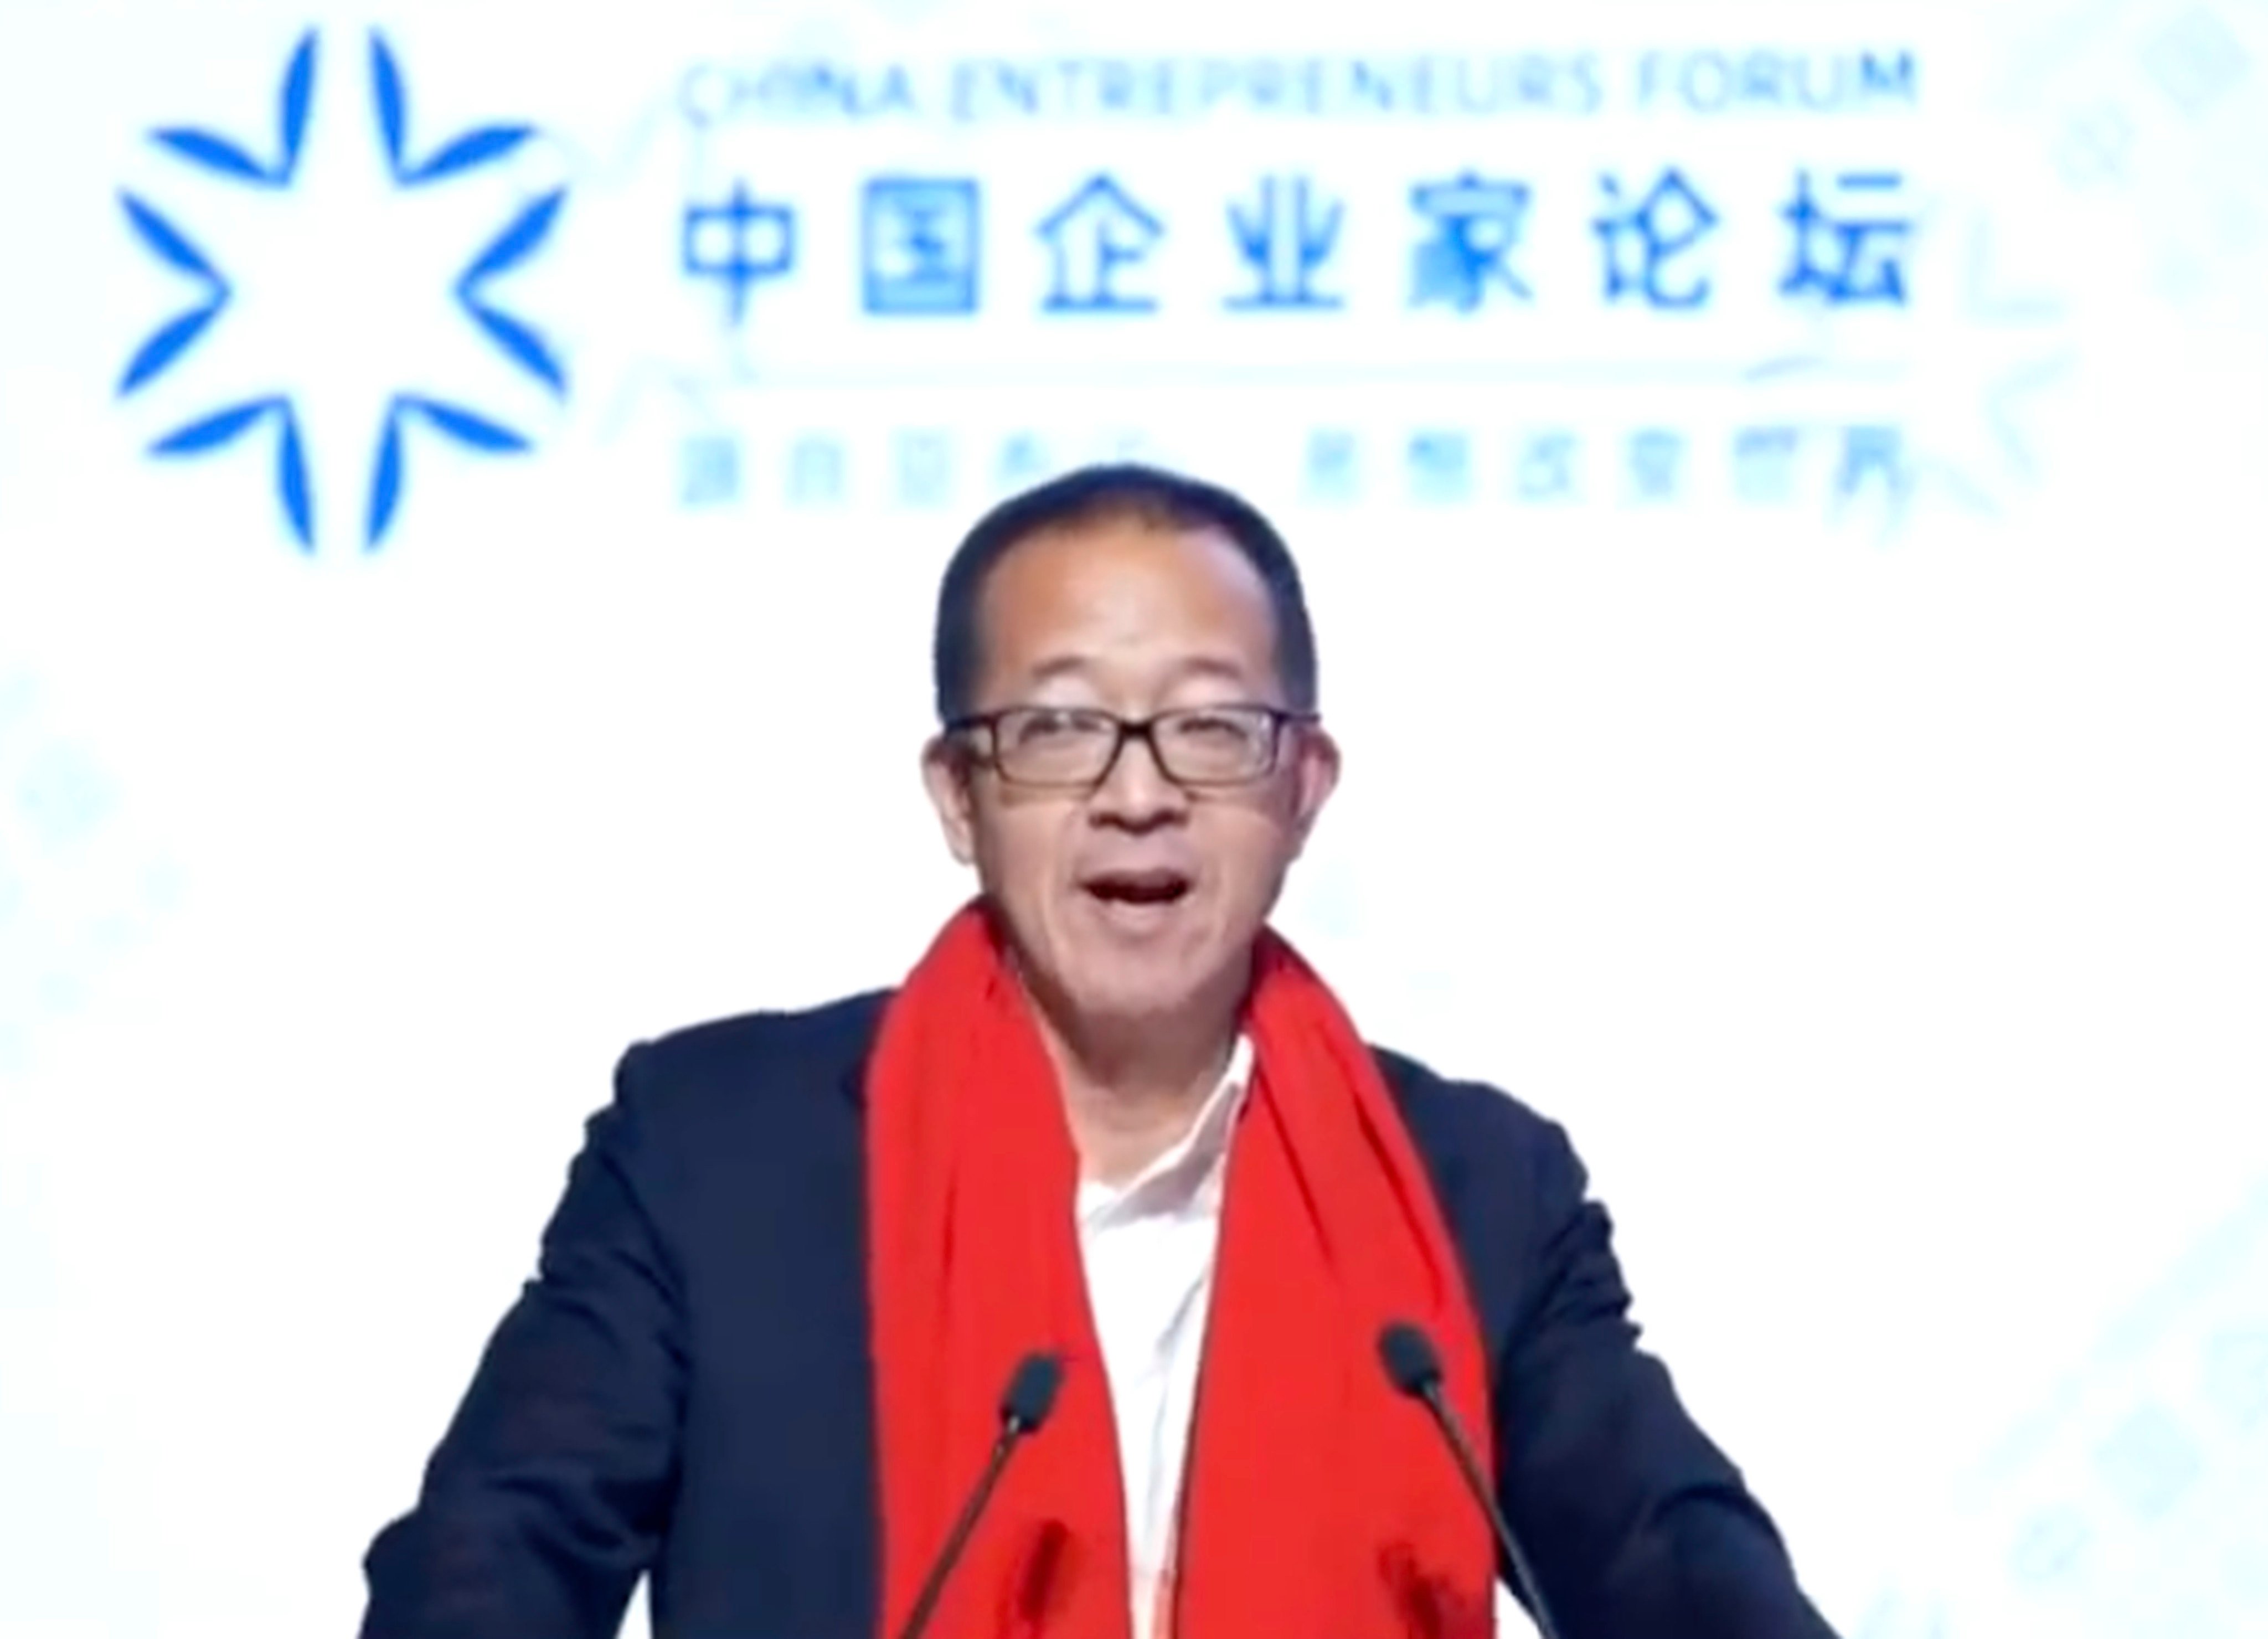 Michael Yu Minhong, founder of New Oriental Education & Technology, has asked Beijing to “redress the relations between authorities and entrepreneurs”. Photo: Weibo